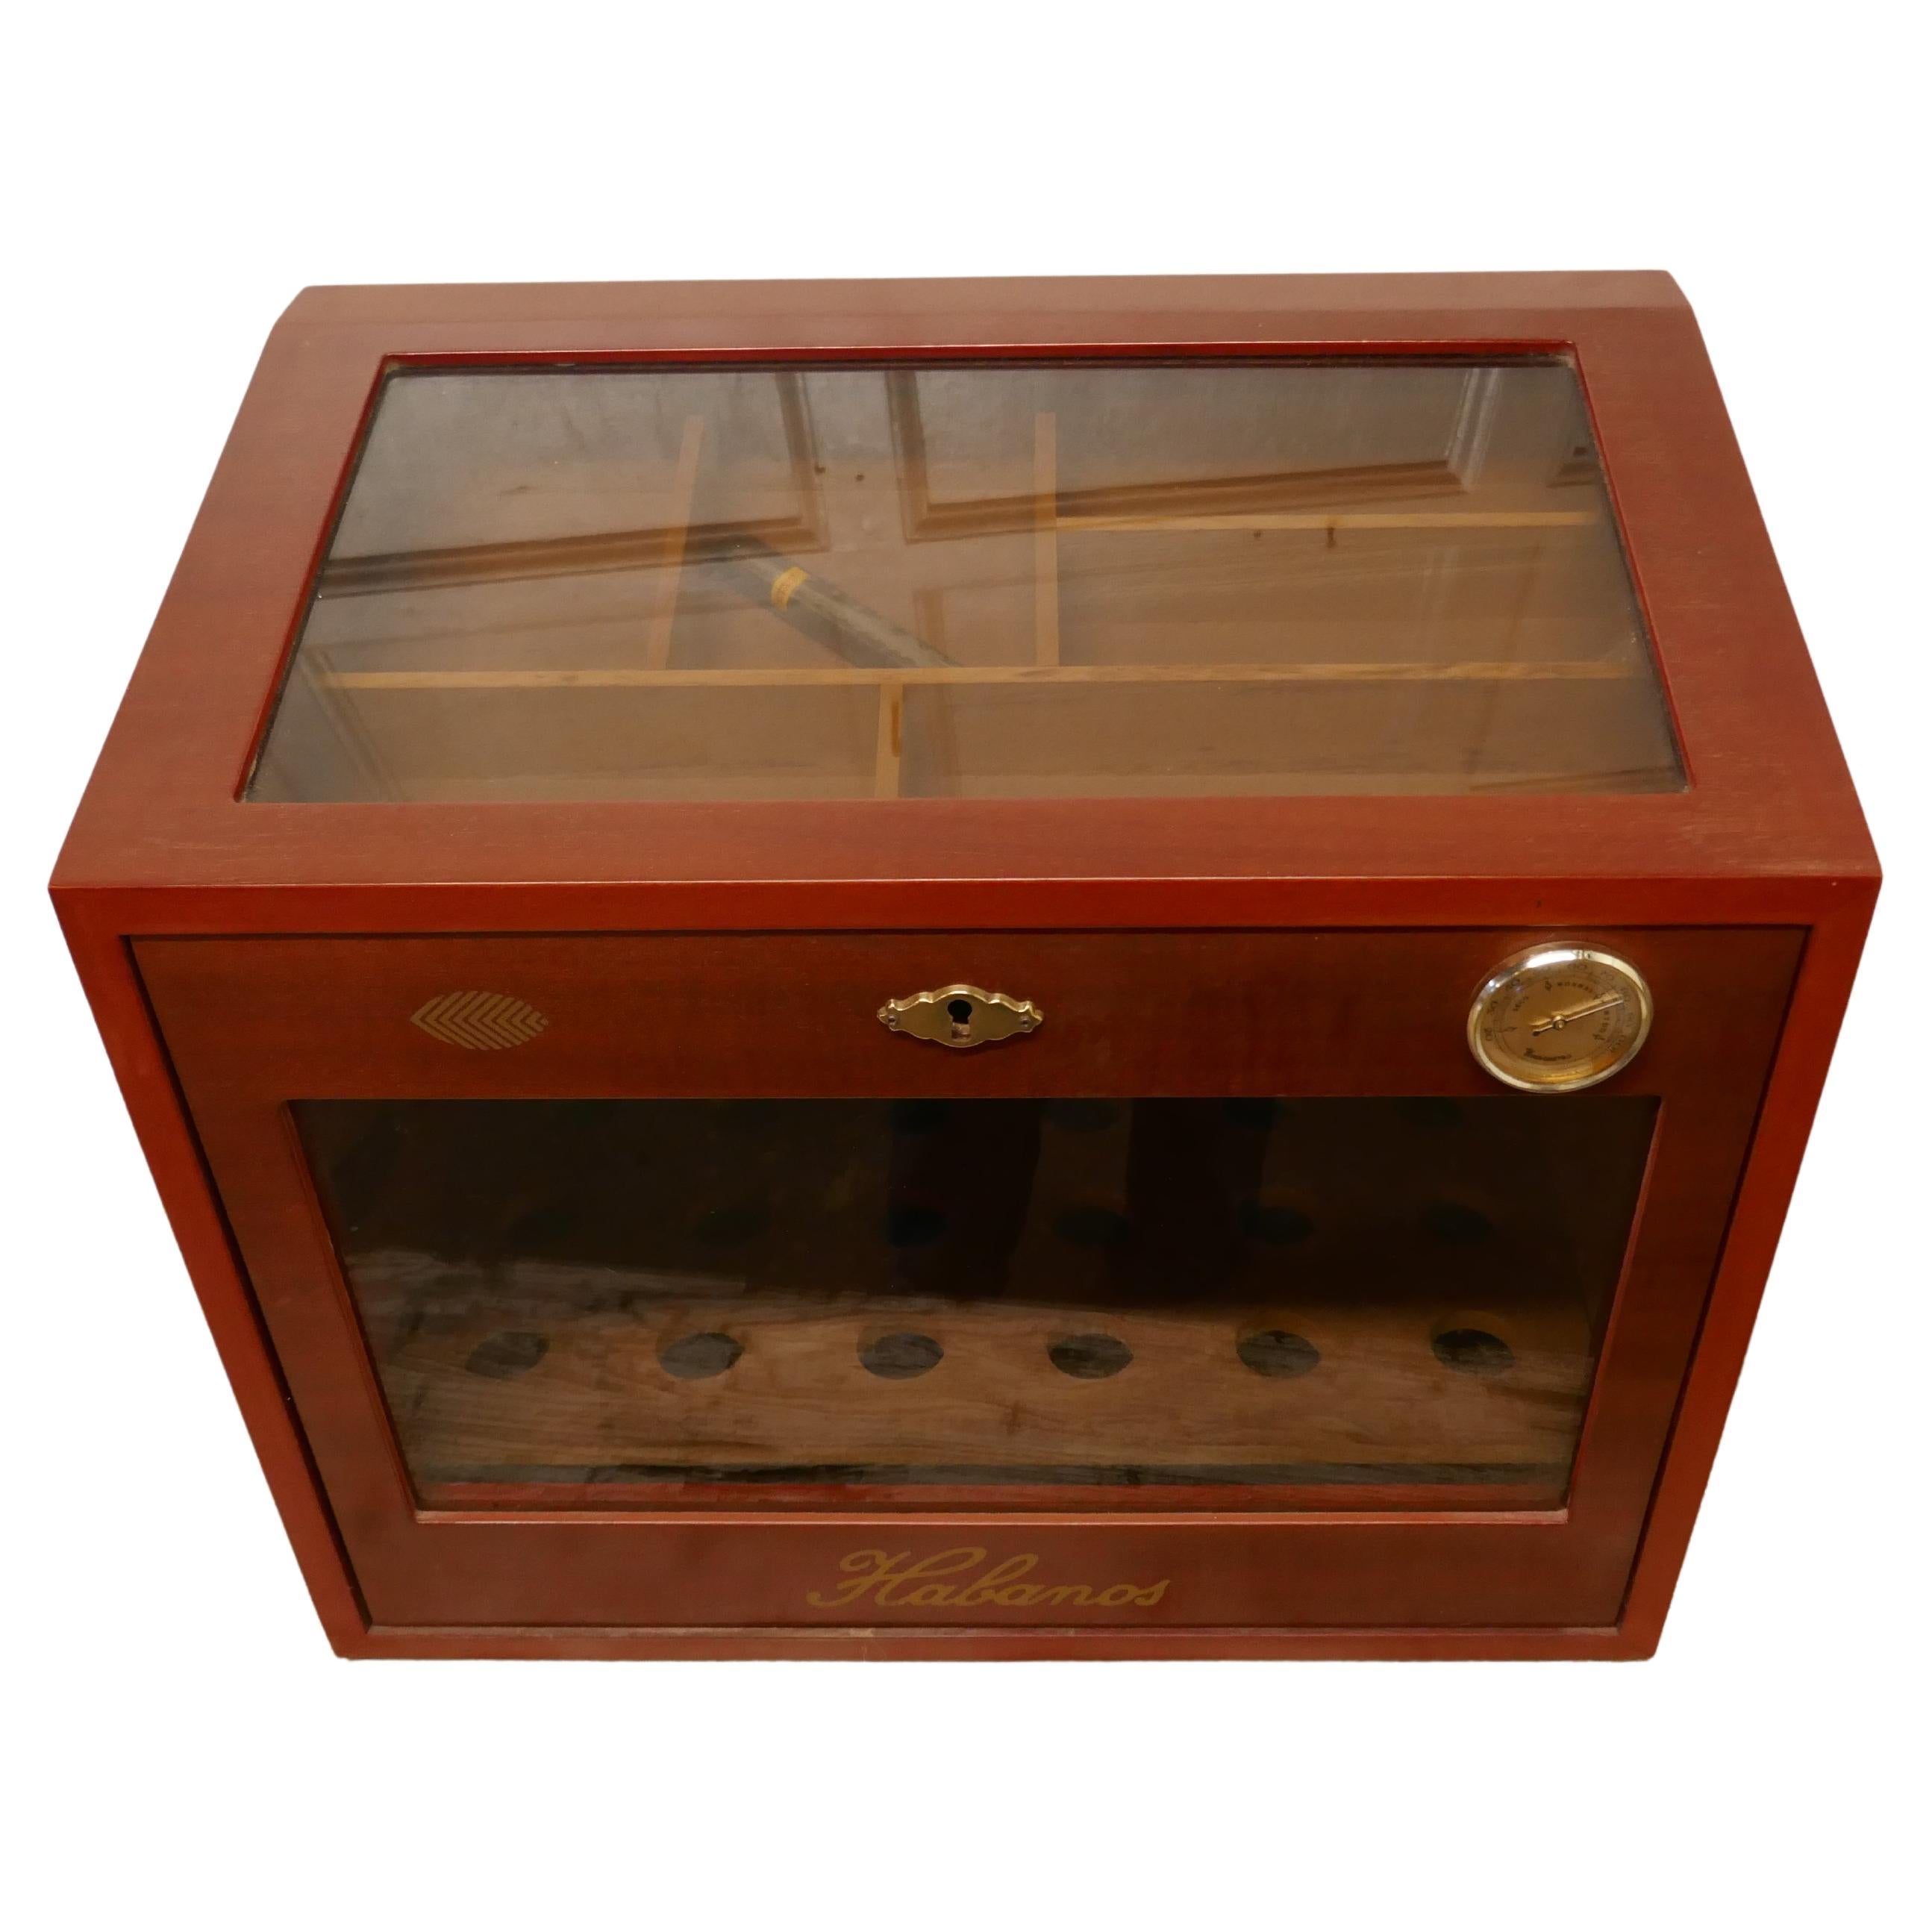 Cherry Finish Glass Fronted Humidor by Halbanos